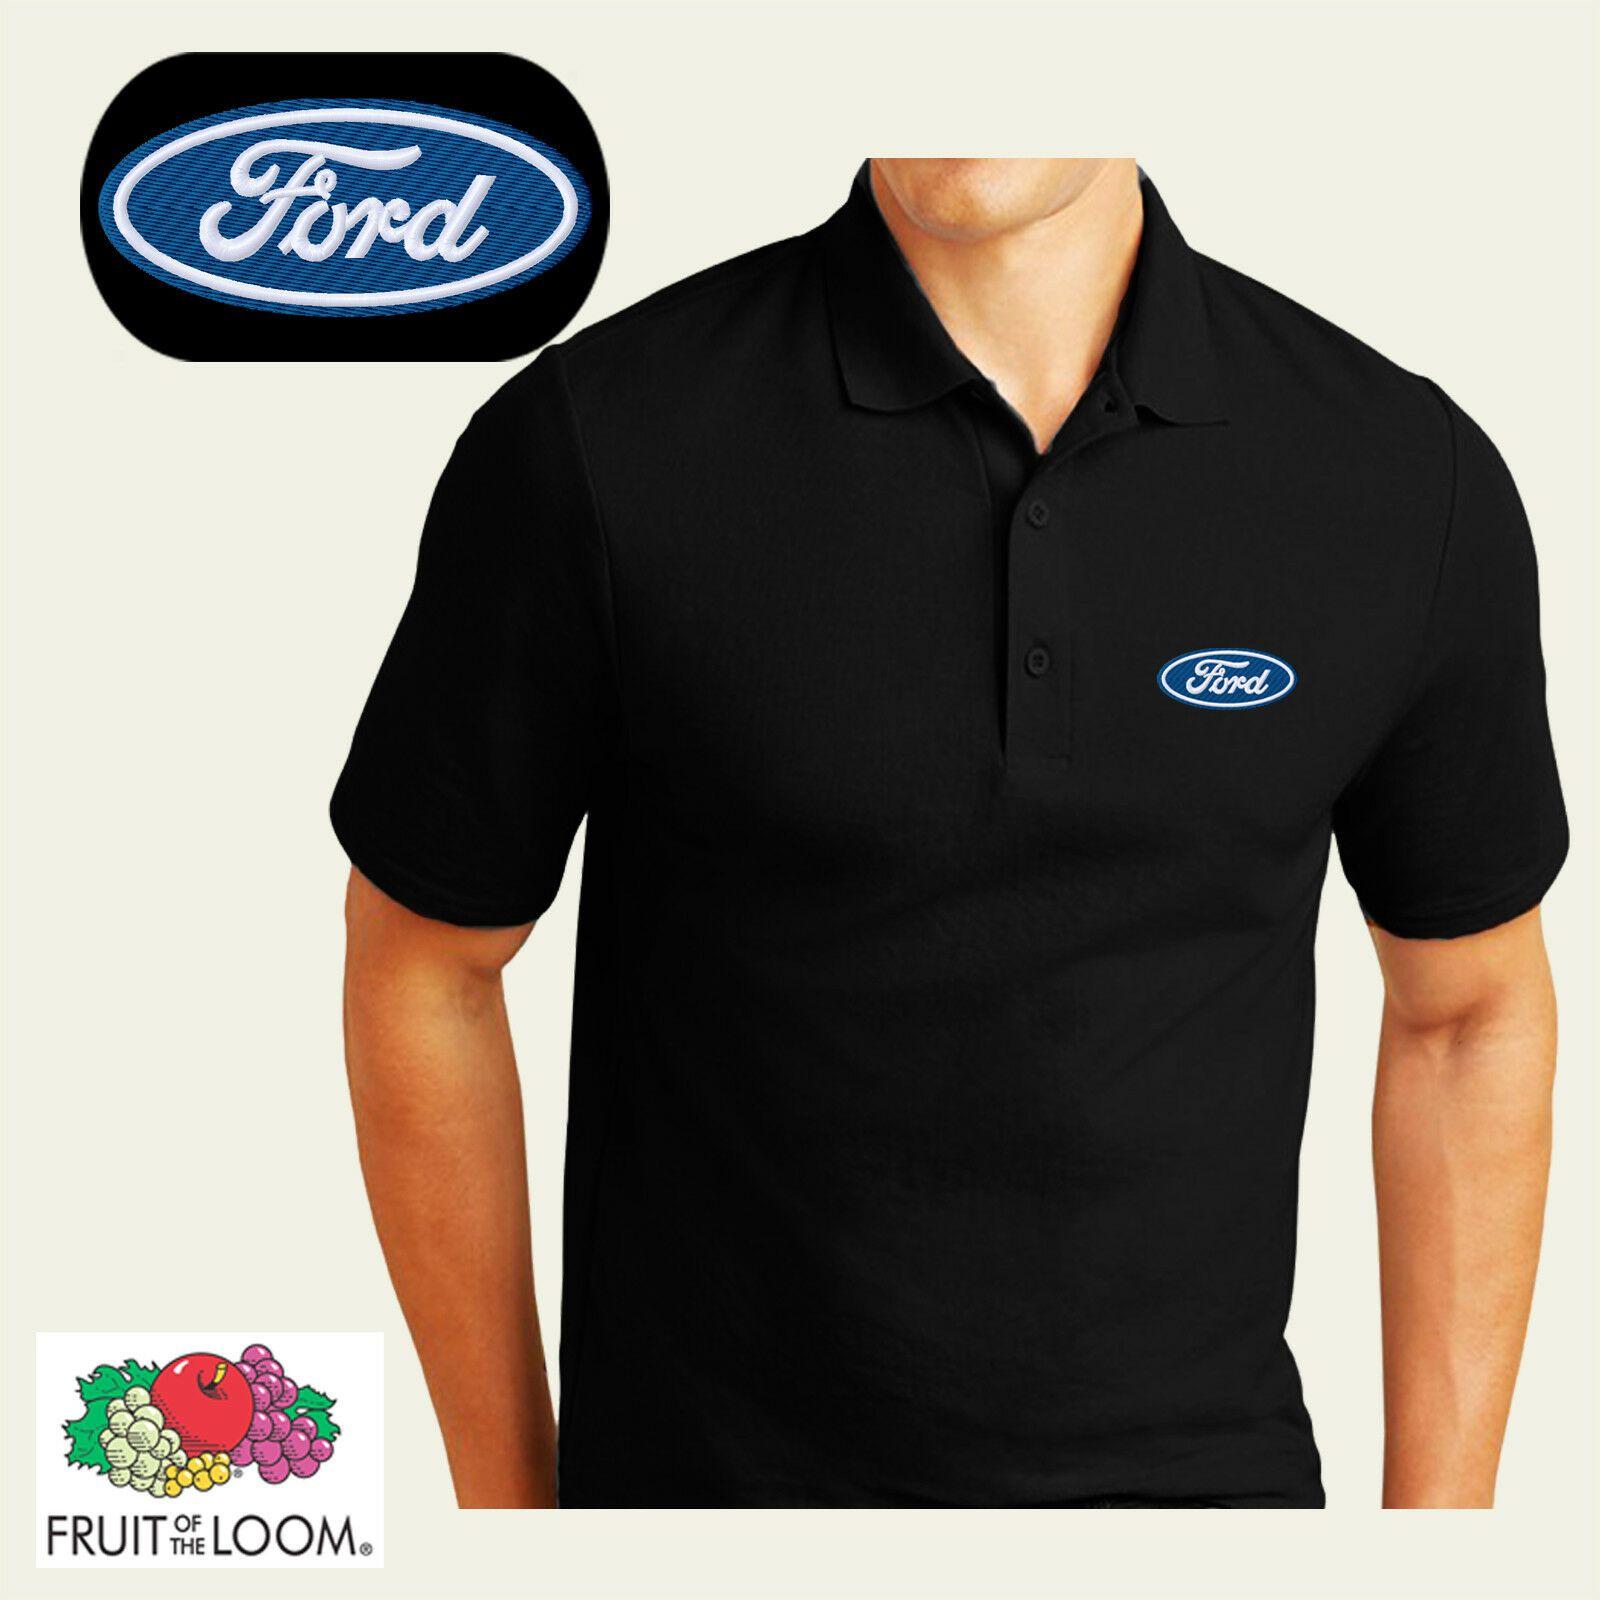 Polo Shirts with Logo - FRUIT OF THE LOOM POLO SHIRT EMBROIDERED FORD LOGO Birthday Gift ...